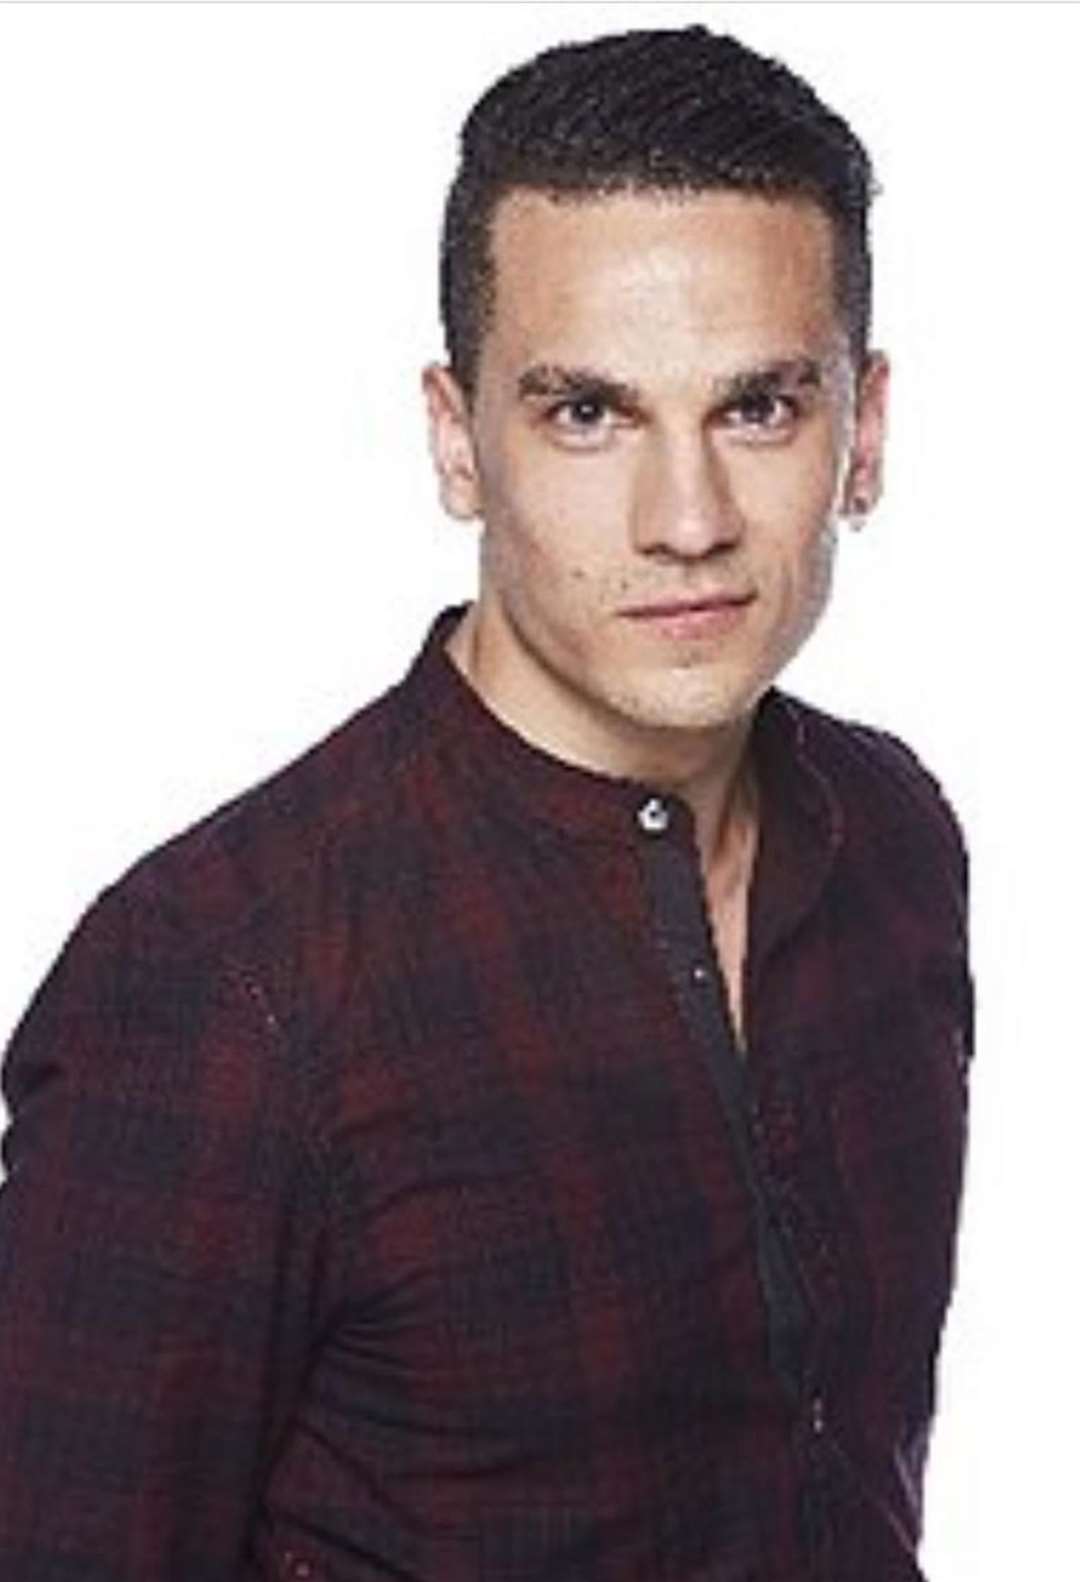 EastEnders actor Aaron Sidwell was reported to have been threatened with a bread knife